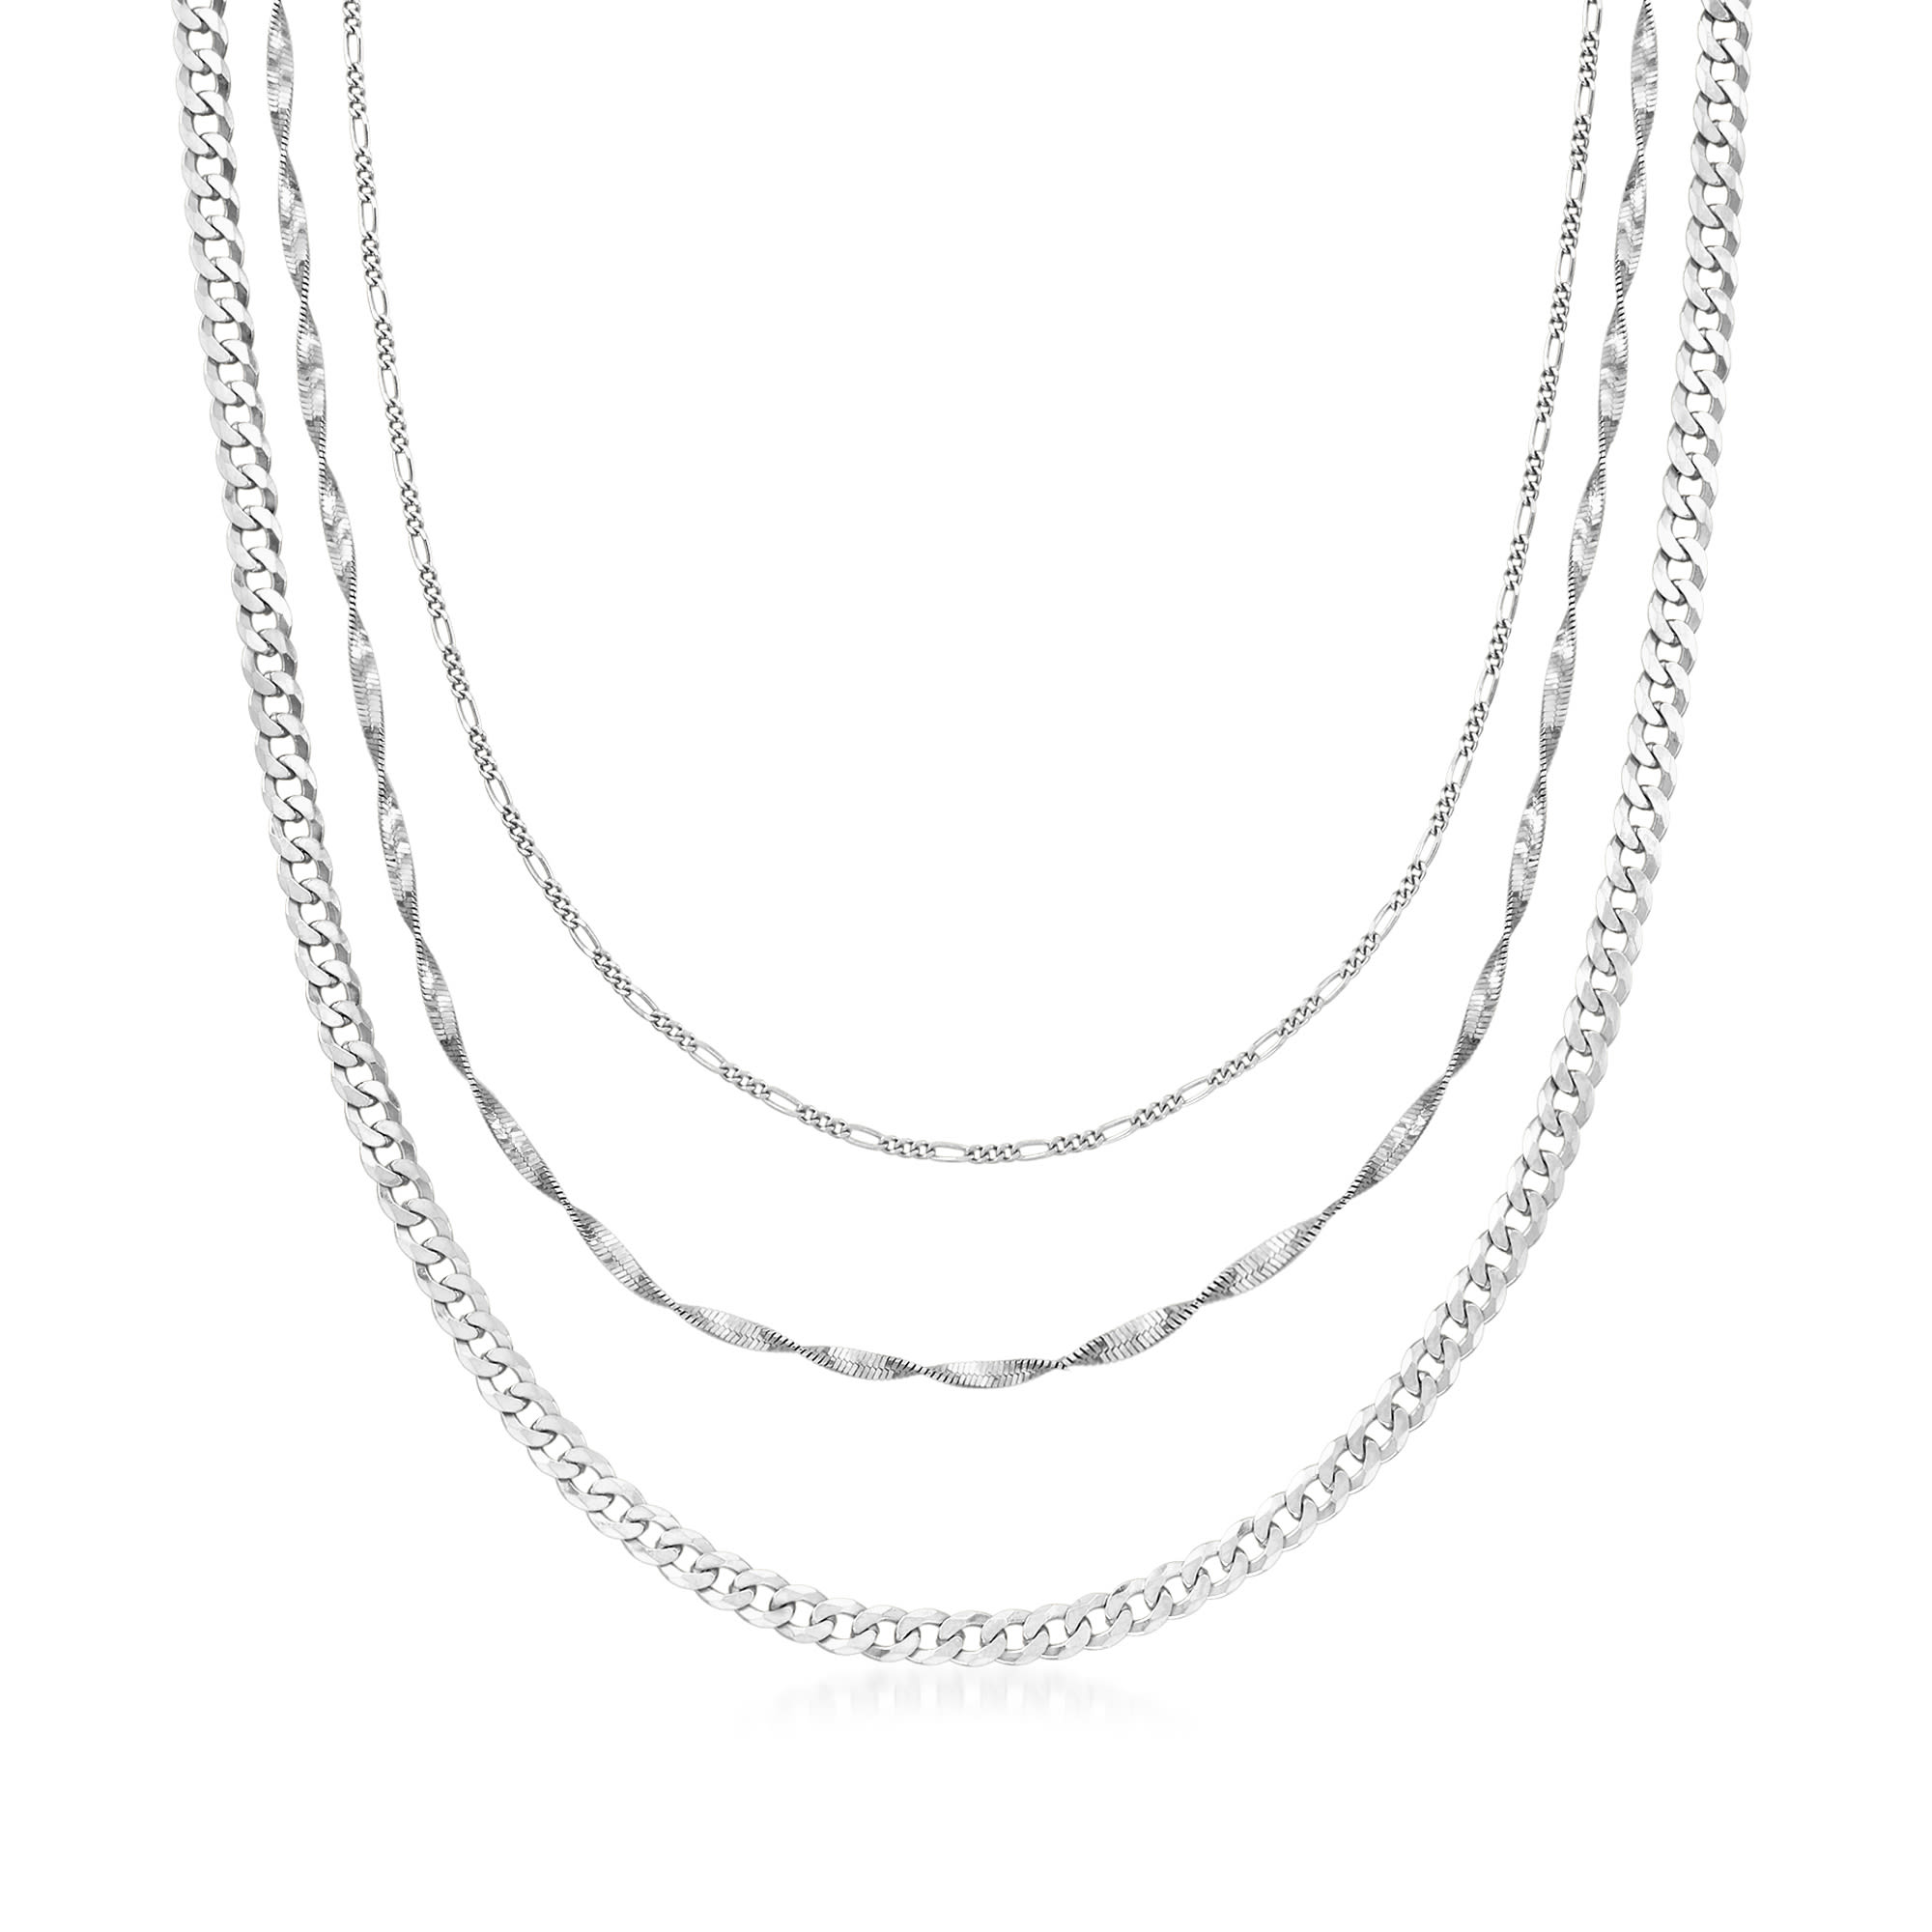 Italian Sterling Silver Multi-Chain Necklace | Ross-Simons